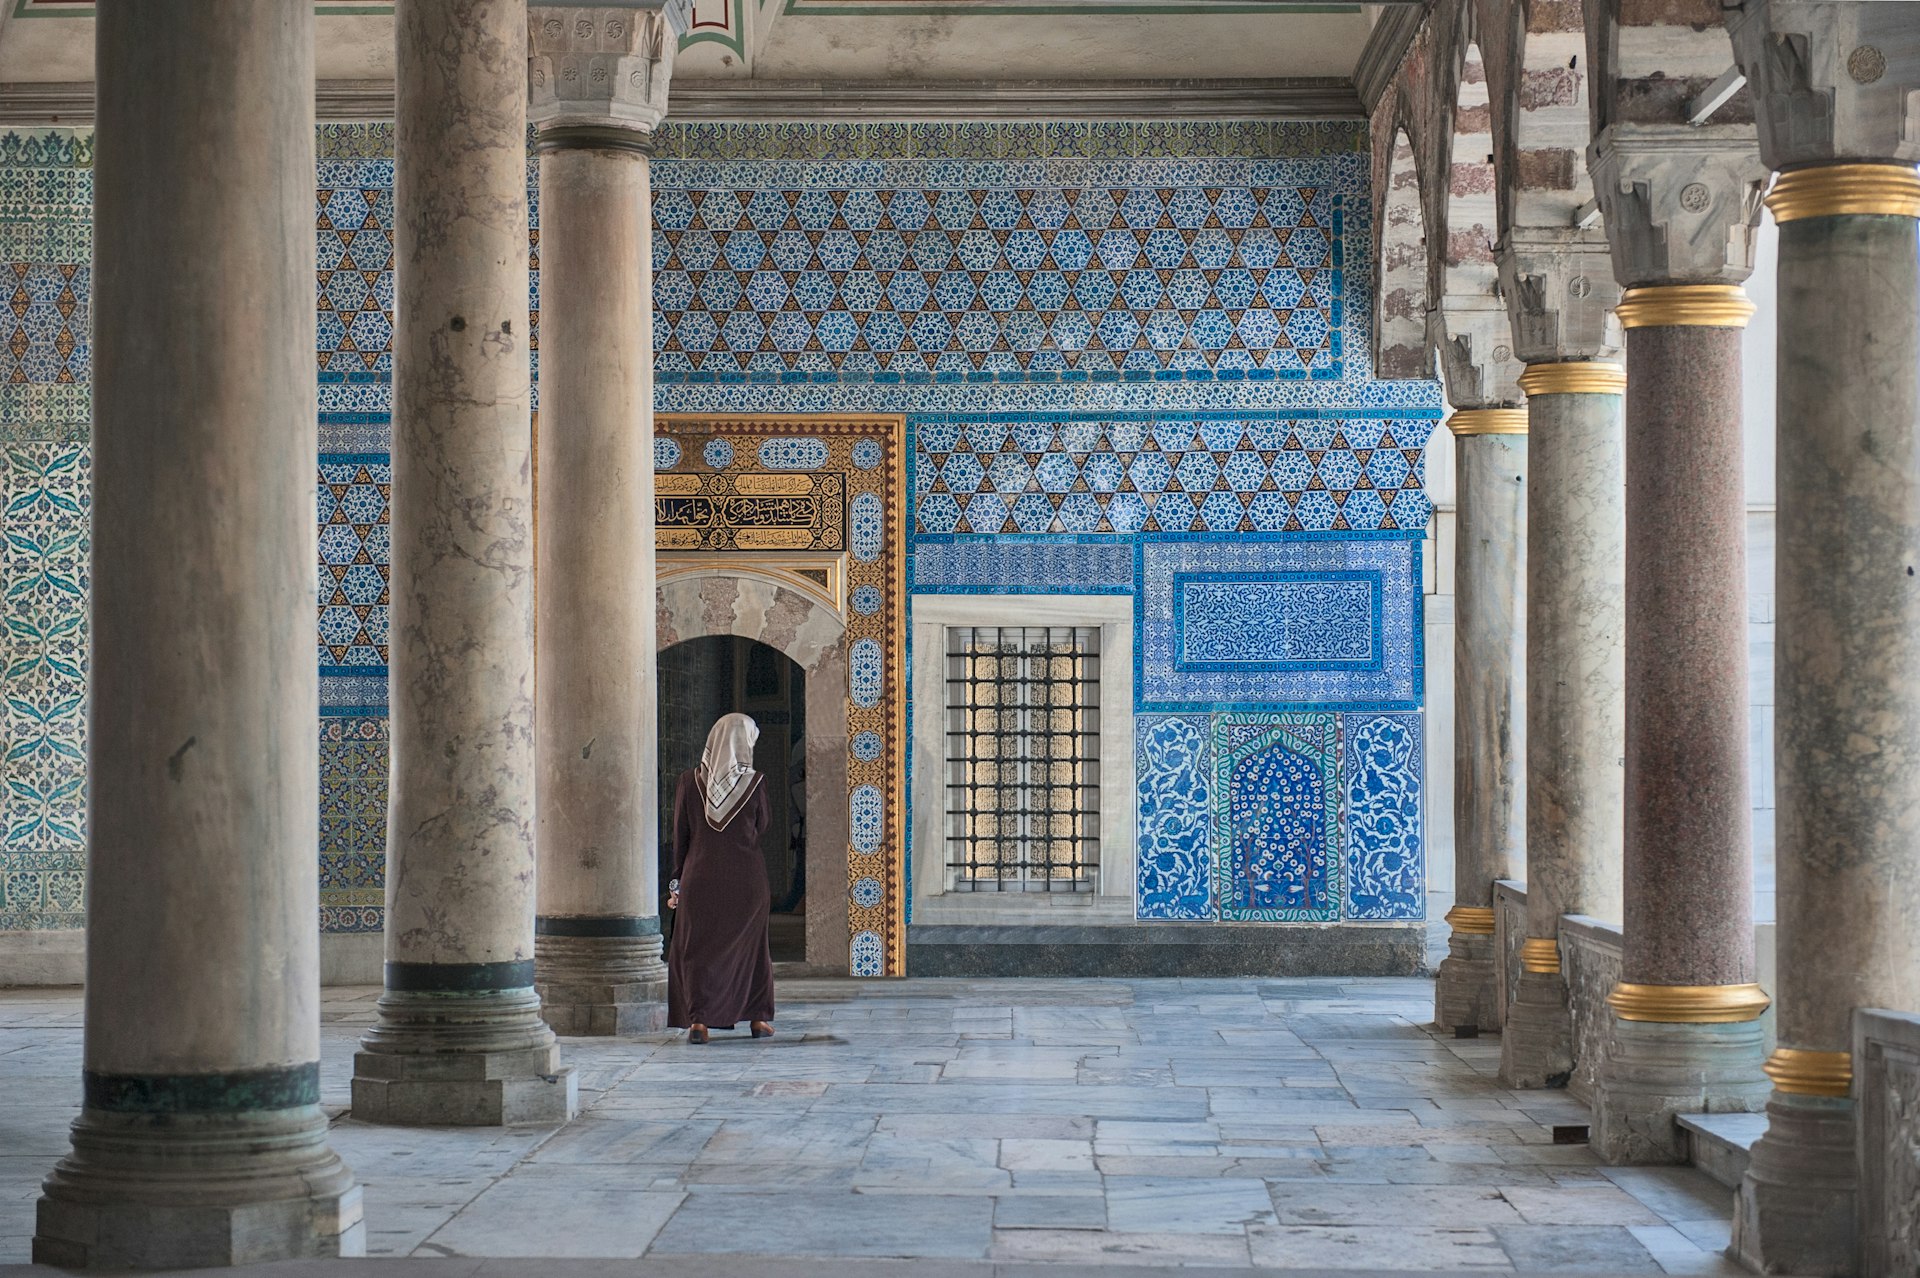 Woman walking through a tiled room in Topkapi Palace, Istanbul